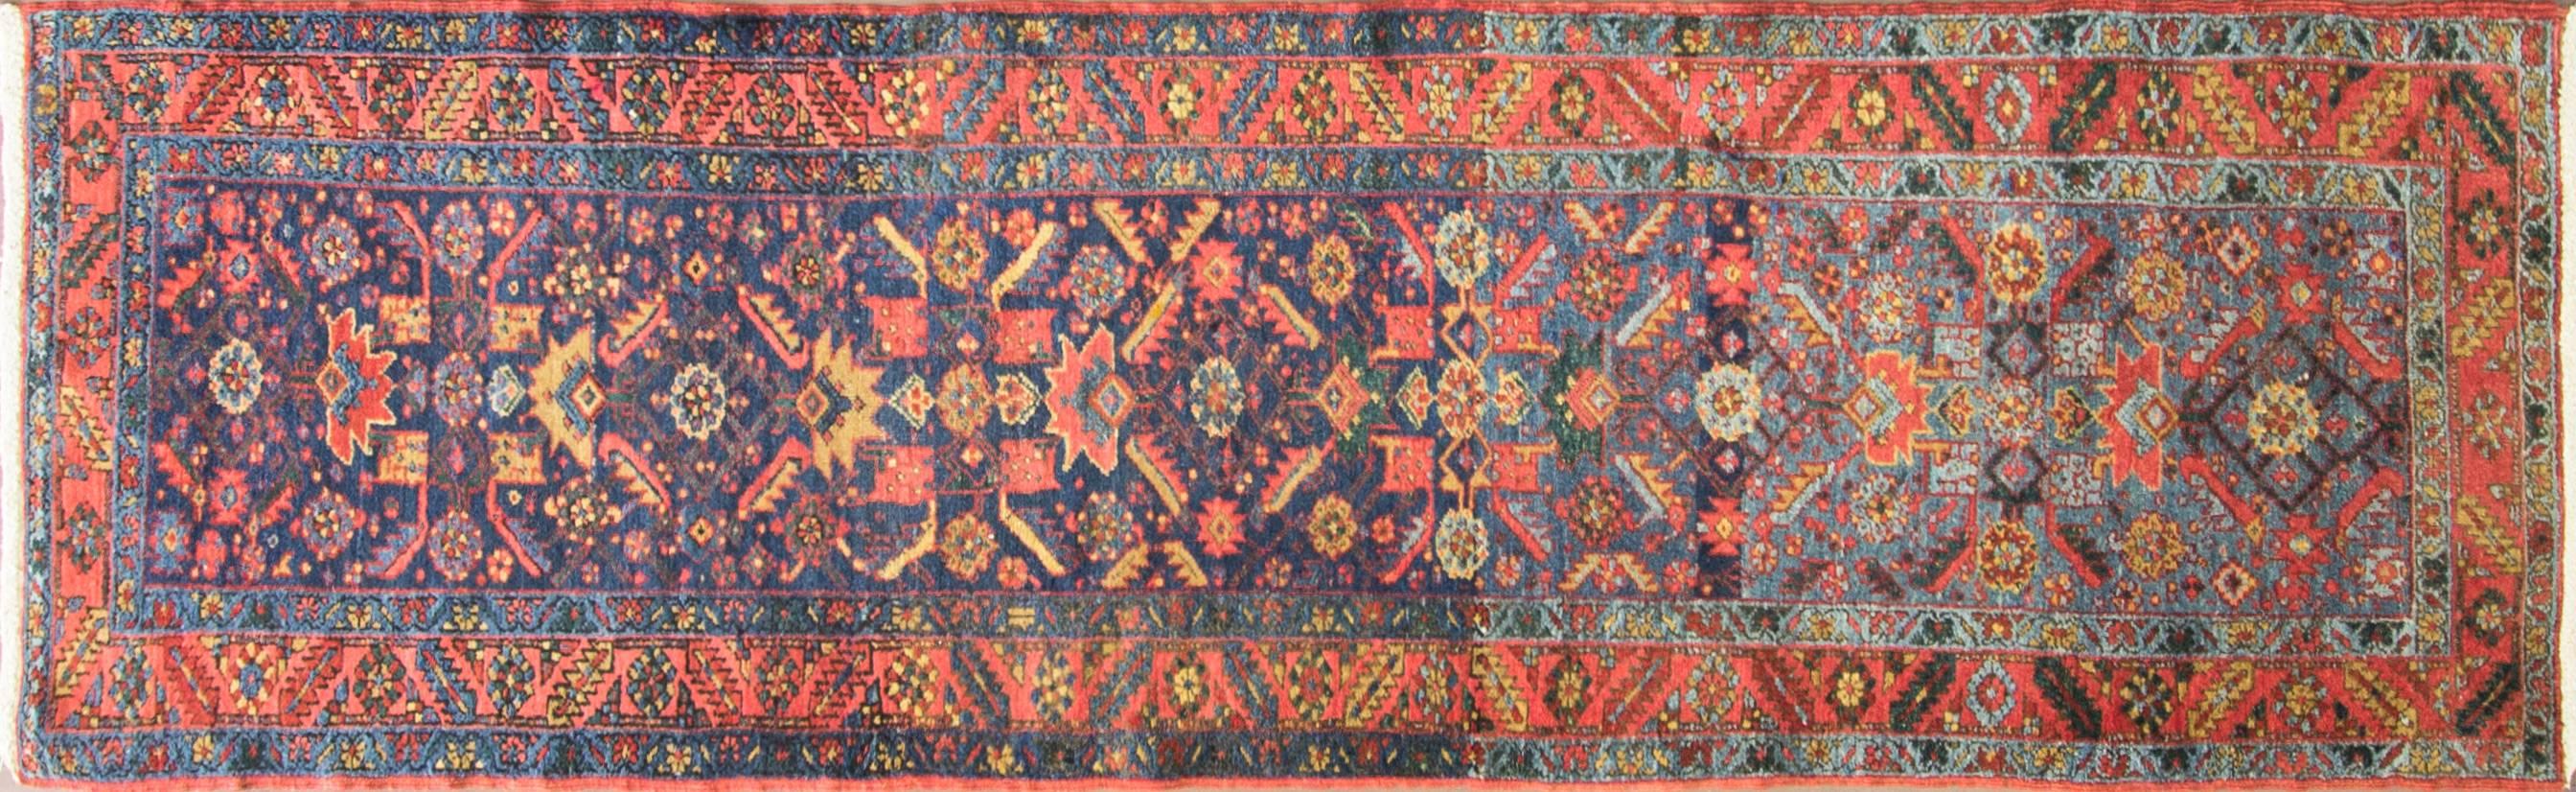 Charming: The light blue color changing to darker blue and vibrant design.
Gorgeous antique Persian Heriz runner with all-over design and breathtaking blue background color. Heriz rugs are Persian rugs from the area of Heris, East Azerbaijan in